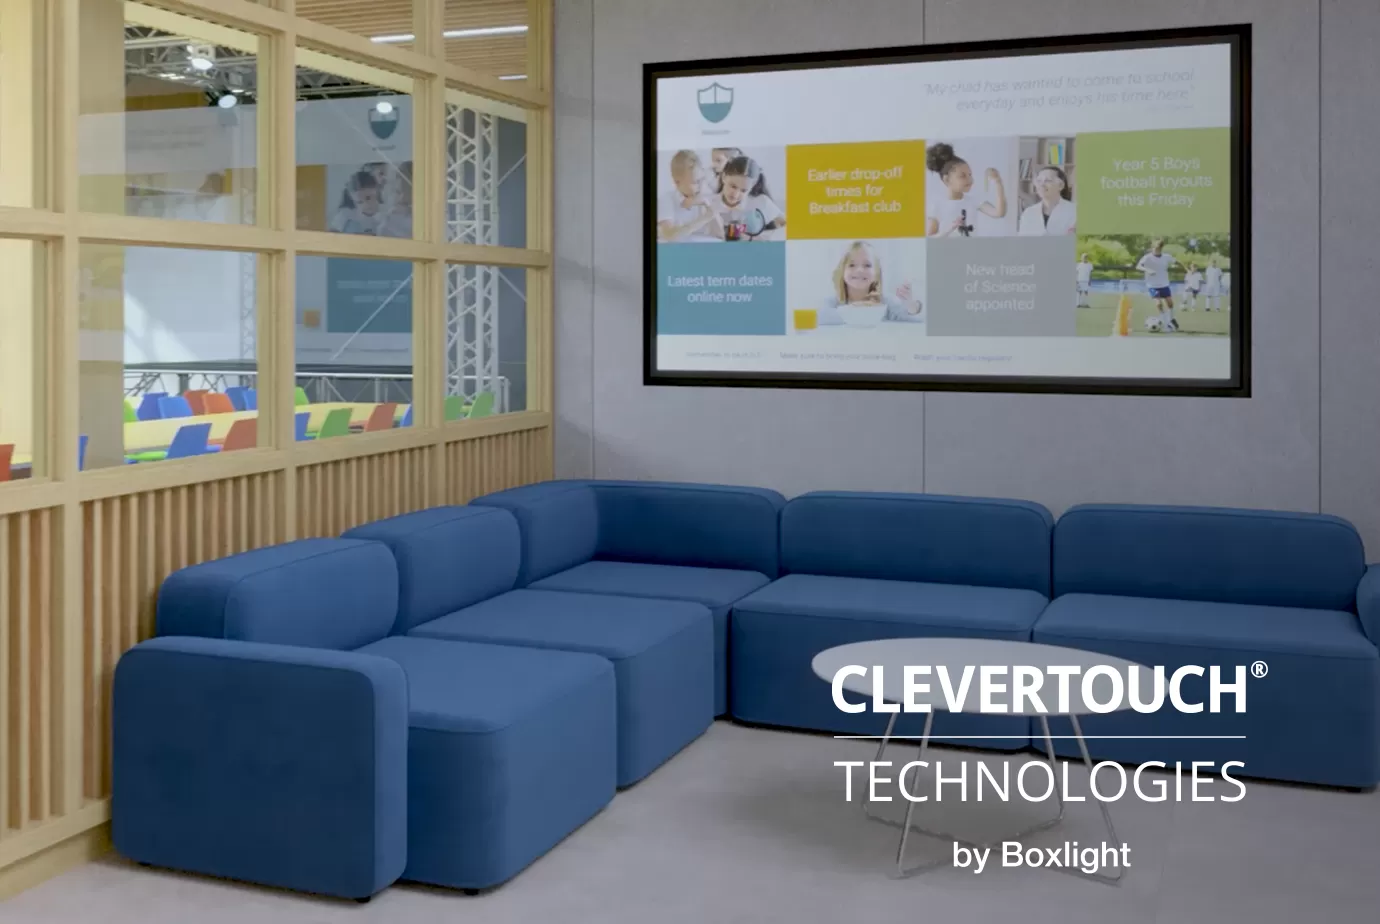 a school sofa/lobby area with CM series digital signage display on the wall and clevertouch logo in the bottom right